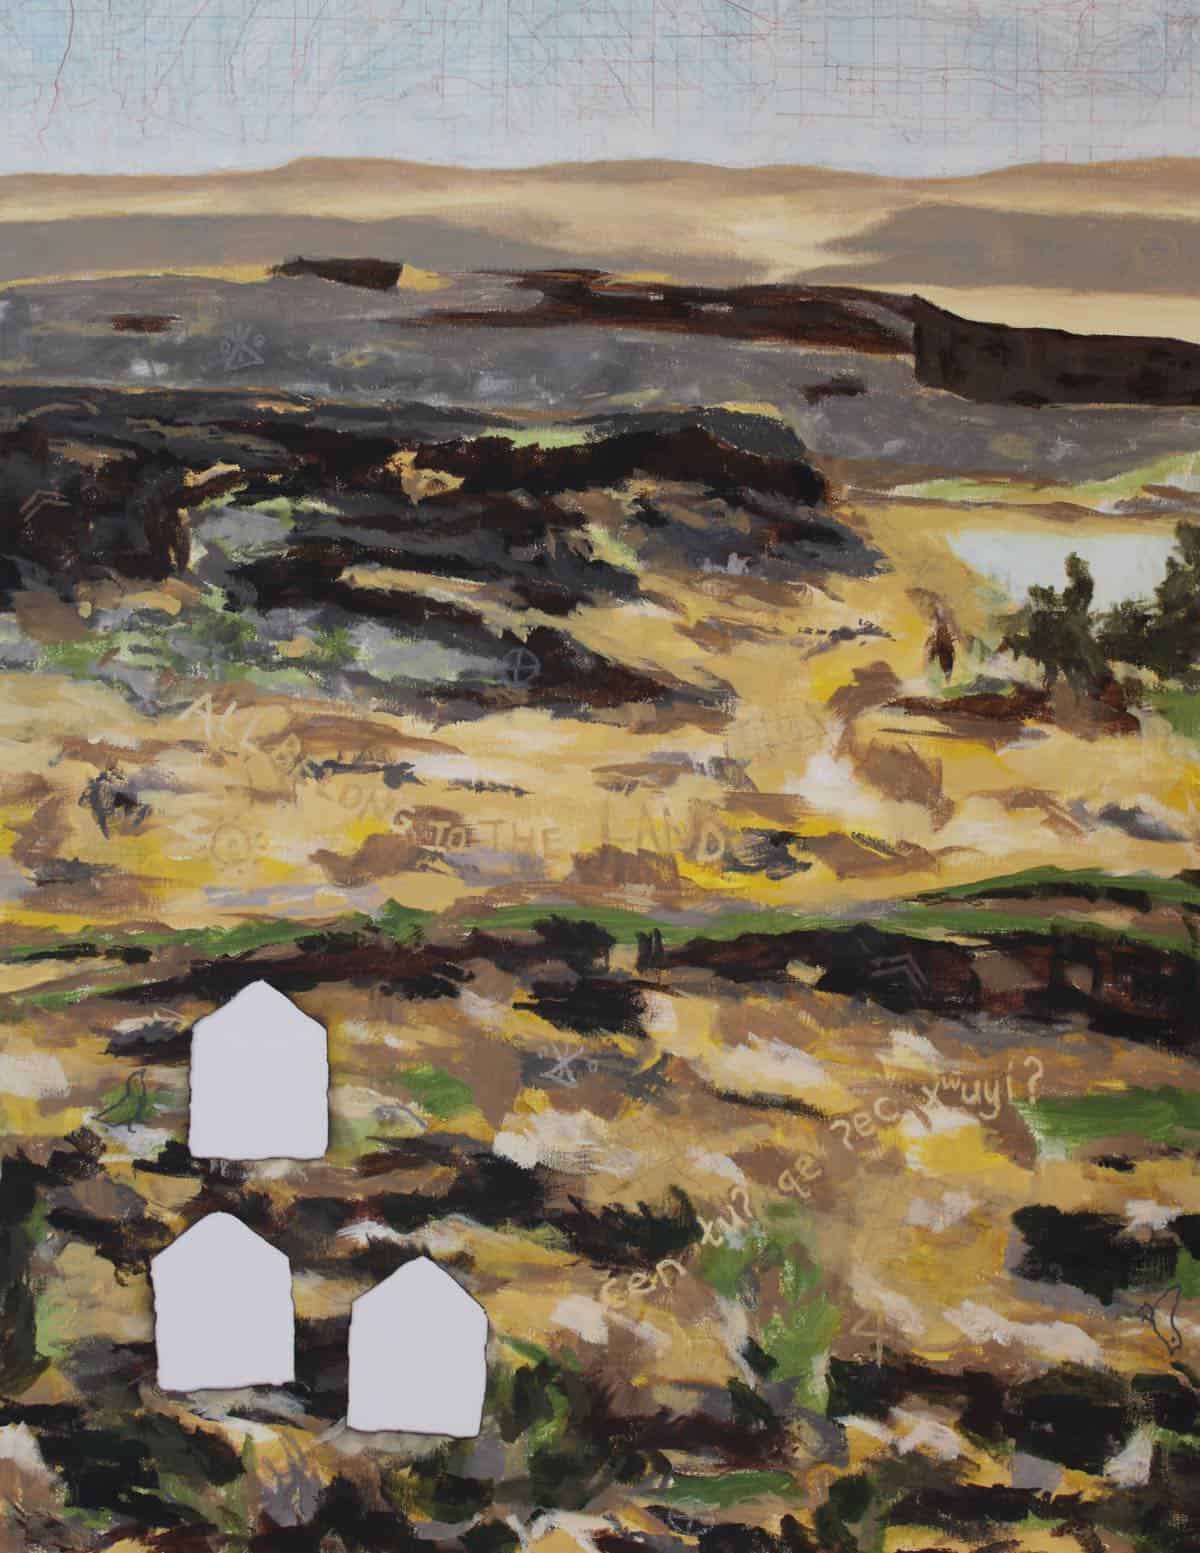 Painting of a landscape with house shapes cut out of the canvas along with writing and symbols throughout the painting.